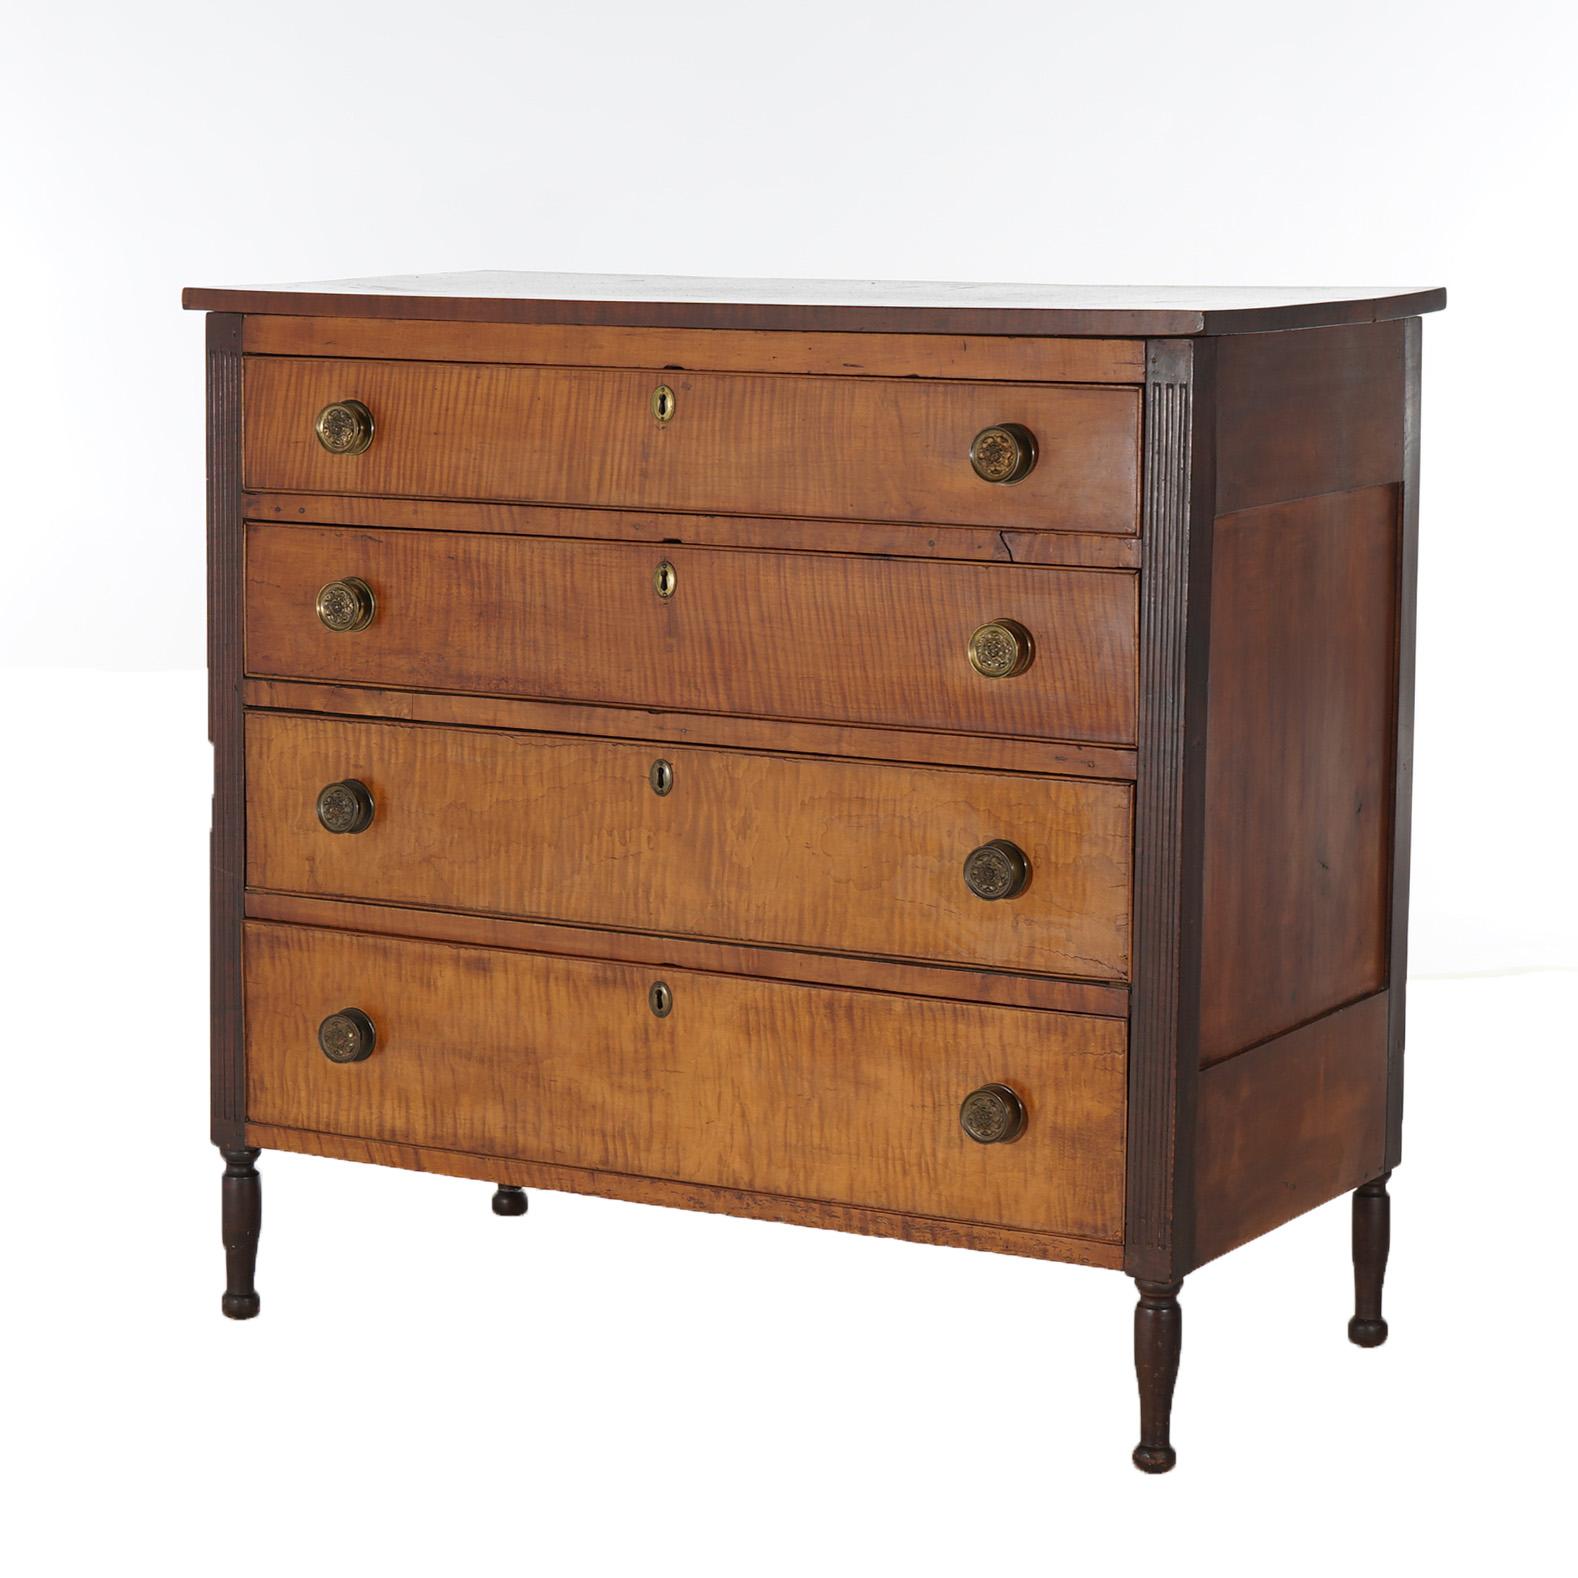 Sheraton Antique Sheridan Tiger Maple Chest with Four Graduated Drawers C1870